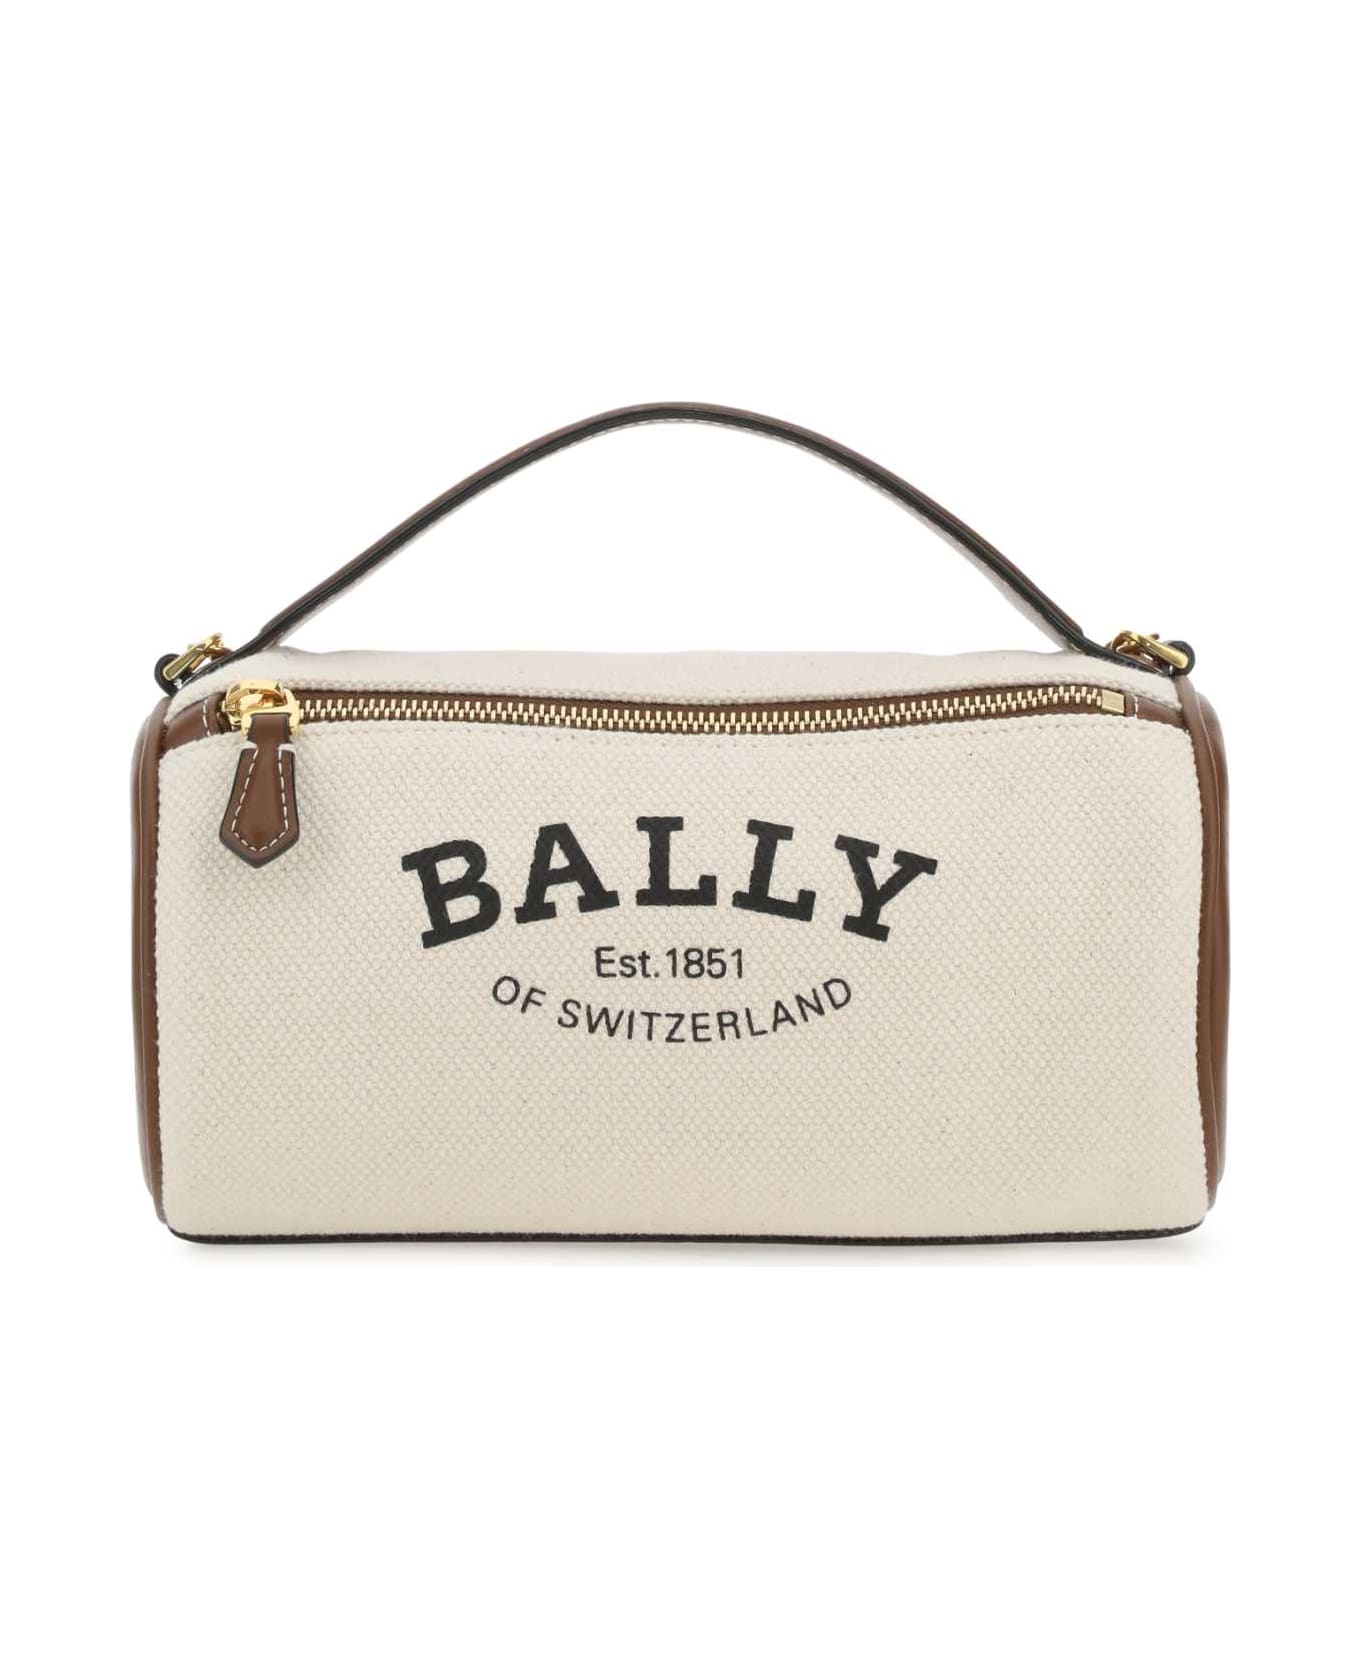 Bally Two-tone Canvas And Leather Calyn Handbag - NATURALCUEROORO クラッチバッグ